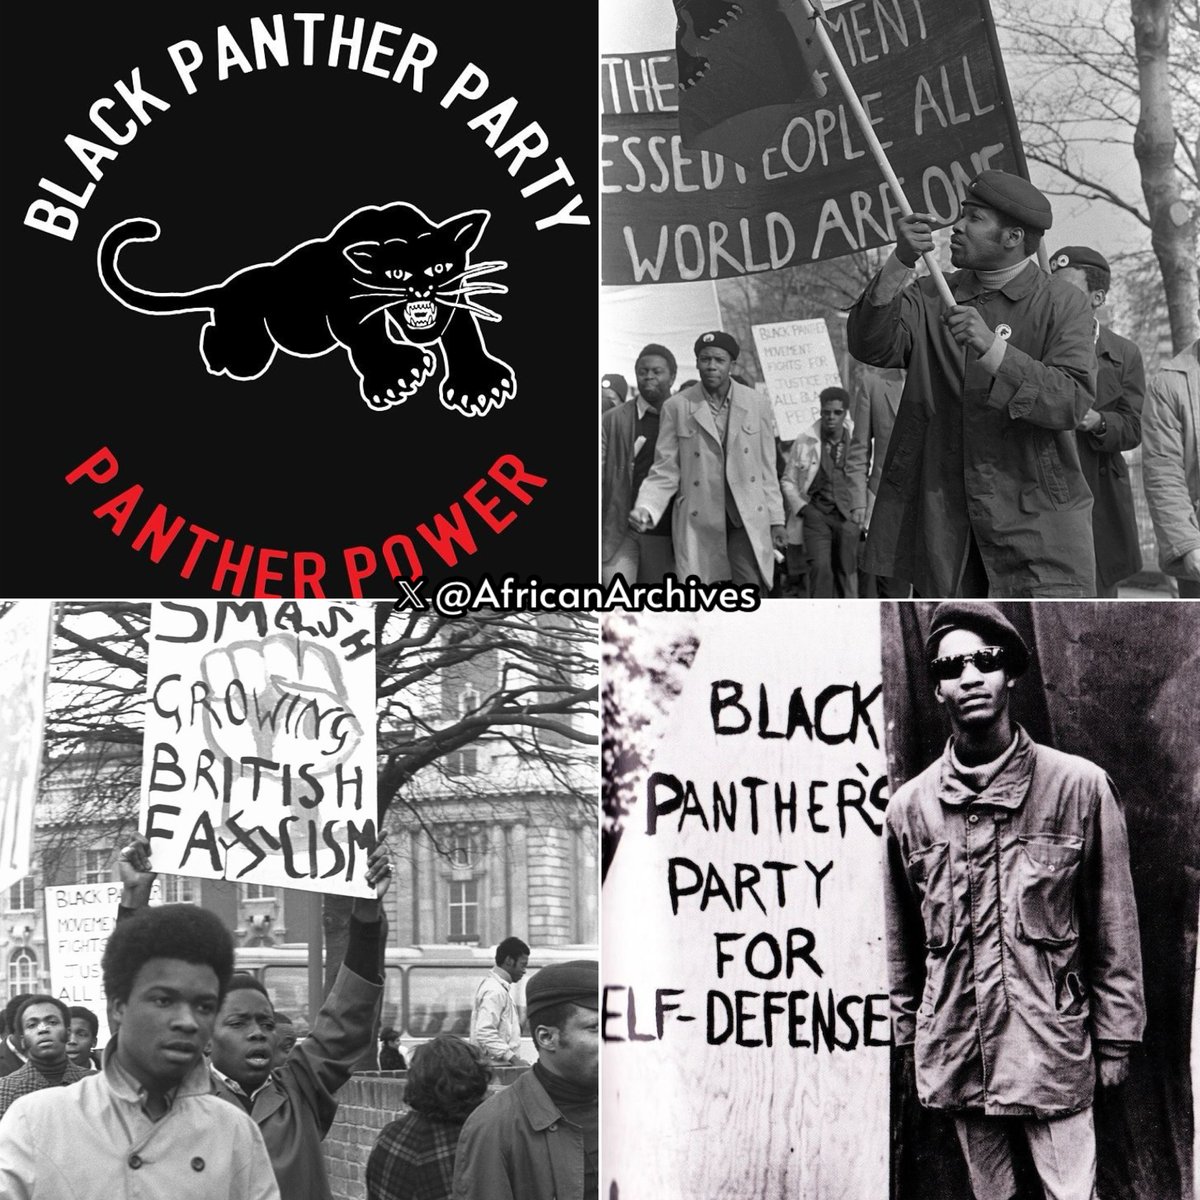 Did you know that Britain had a Black Panther movement? The British Black Panthers (BBP) or the British Black Panther movement (BPM) was a Black Power organisation in the United Kingdom that fought for the rights of Black people and peoples of colour in the country. A THREAD